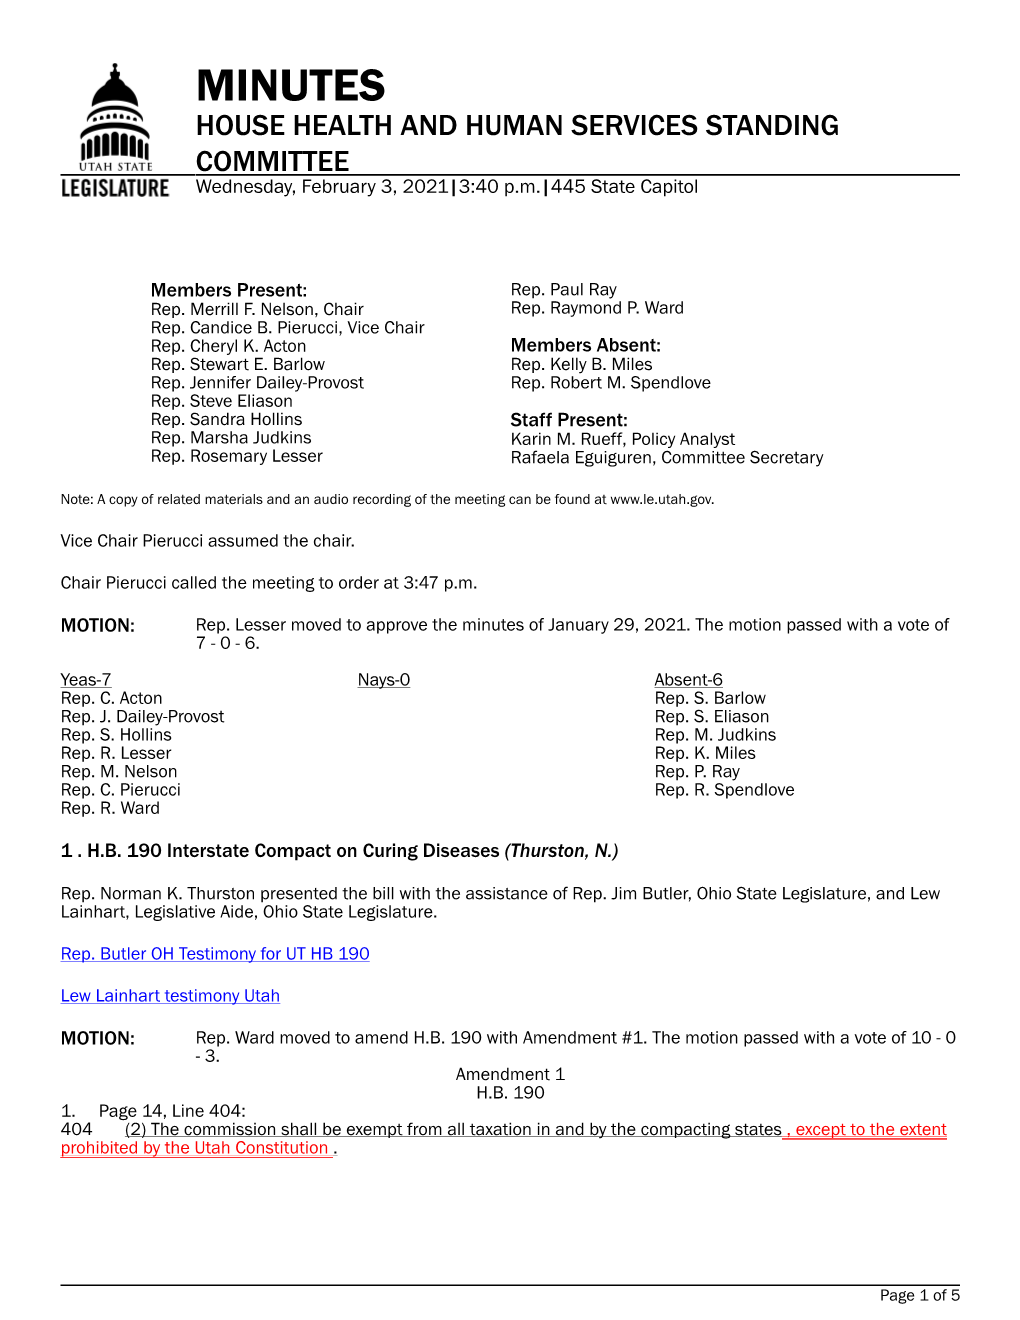 MINUTES HOUSE HEALTH and HUMAN SERVICES STANDING COMMITTEE Wednesday, February 3, 2021|3:40 P.M.|445 State Capitol